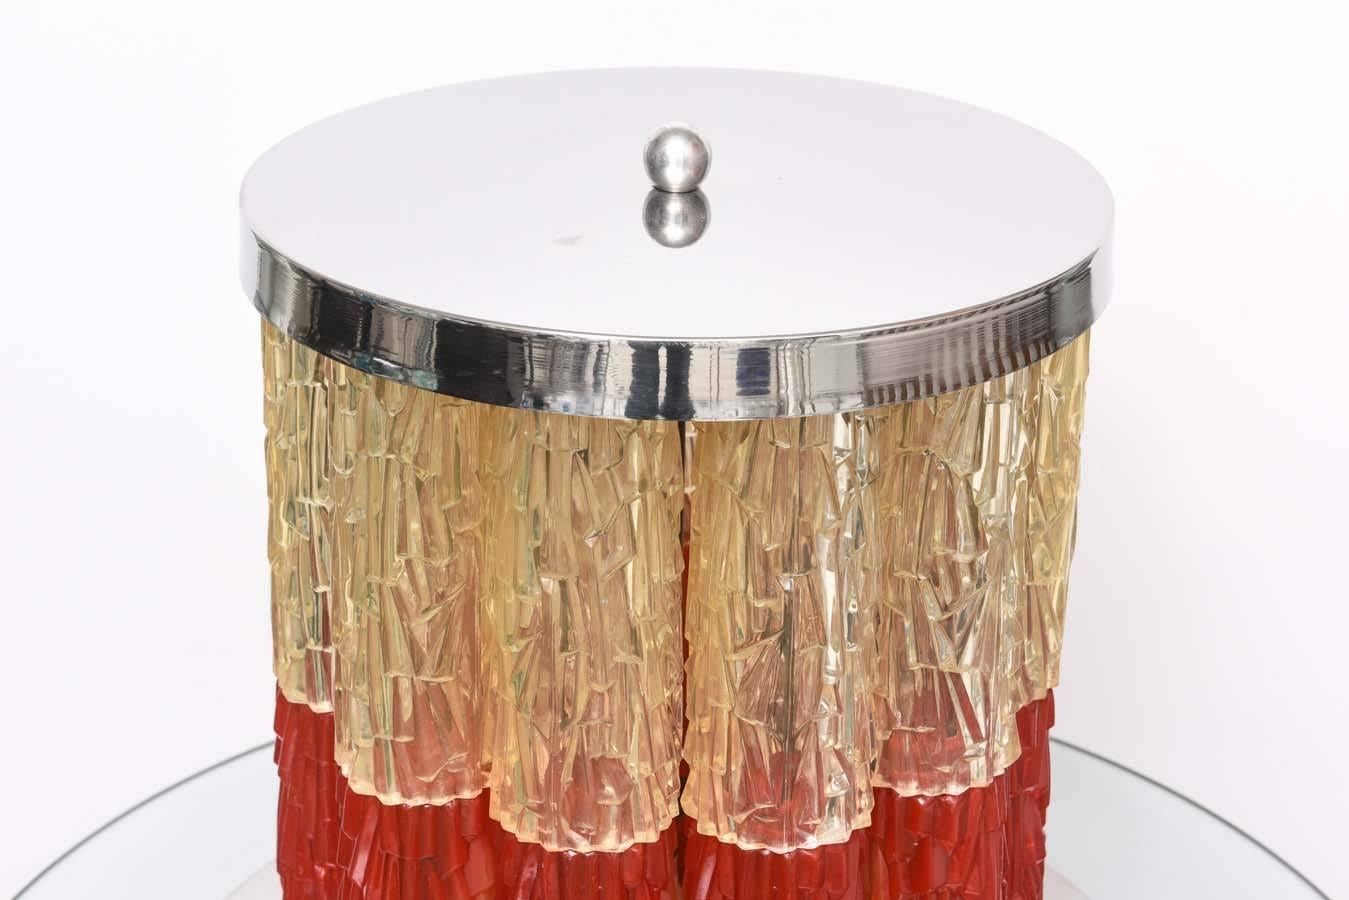 This stylish Italian table lamp was created in the 1960s and is fabricated of Lucite tubes/prisms in an eisglas technique. The Lucite is in a muted red and yellowish color combination (see last photo).

For best net trade price or additional